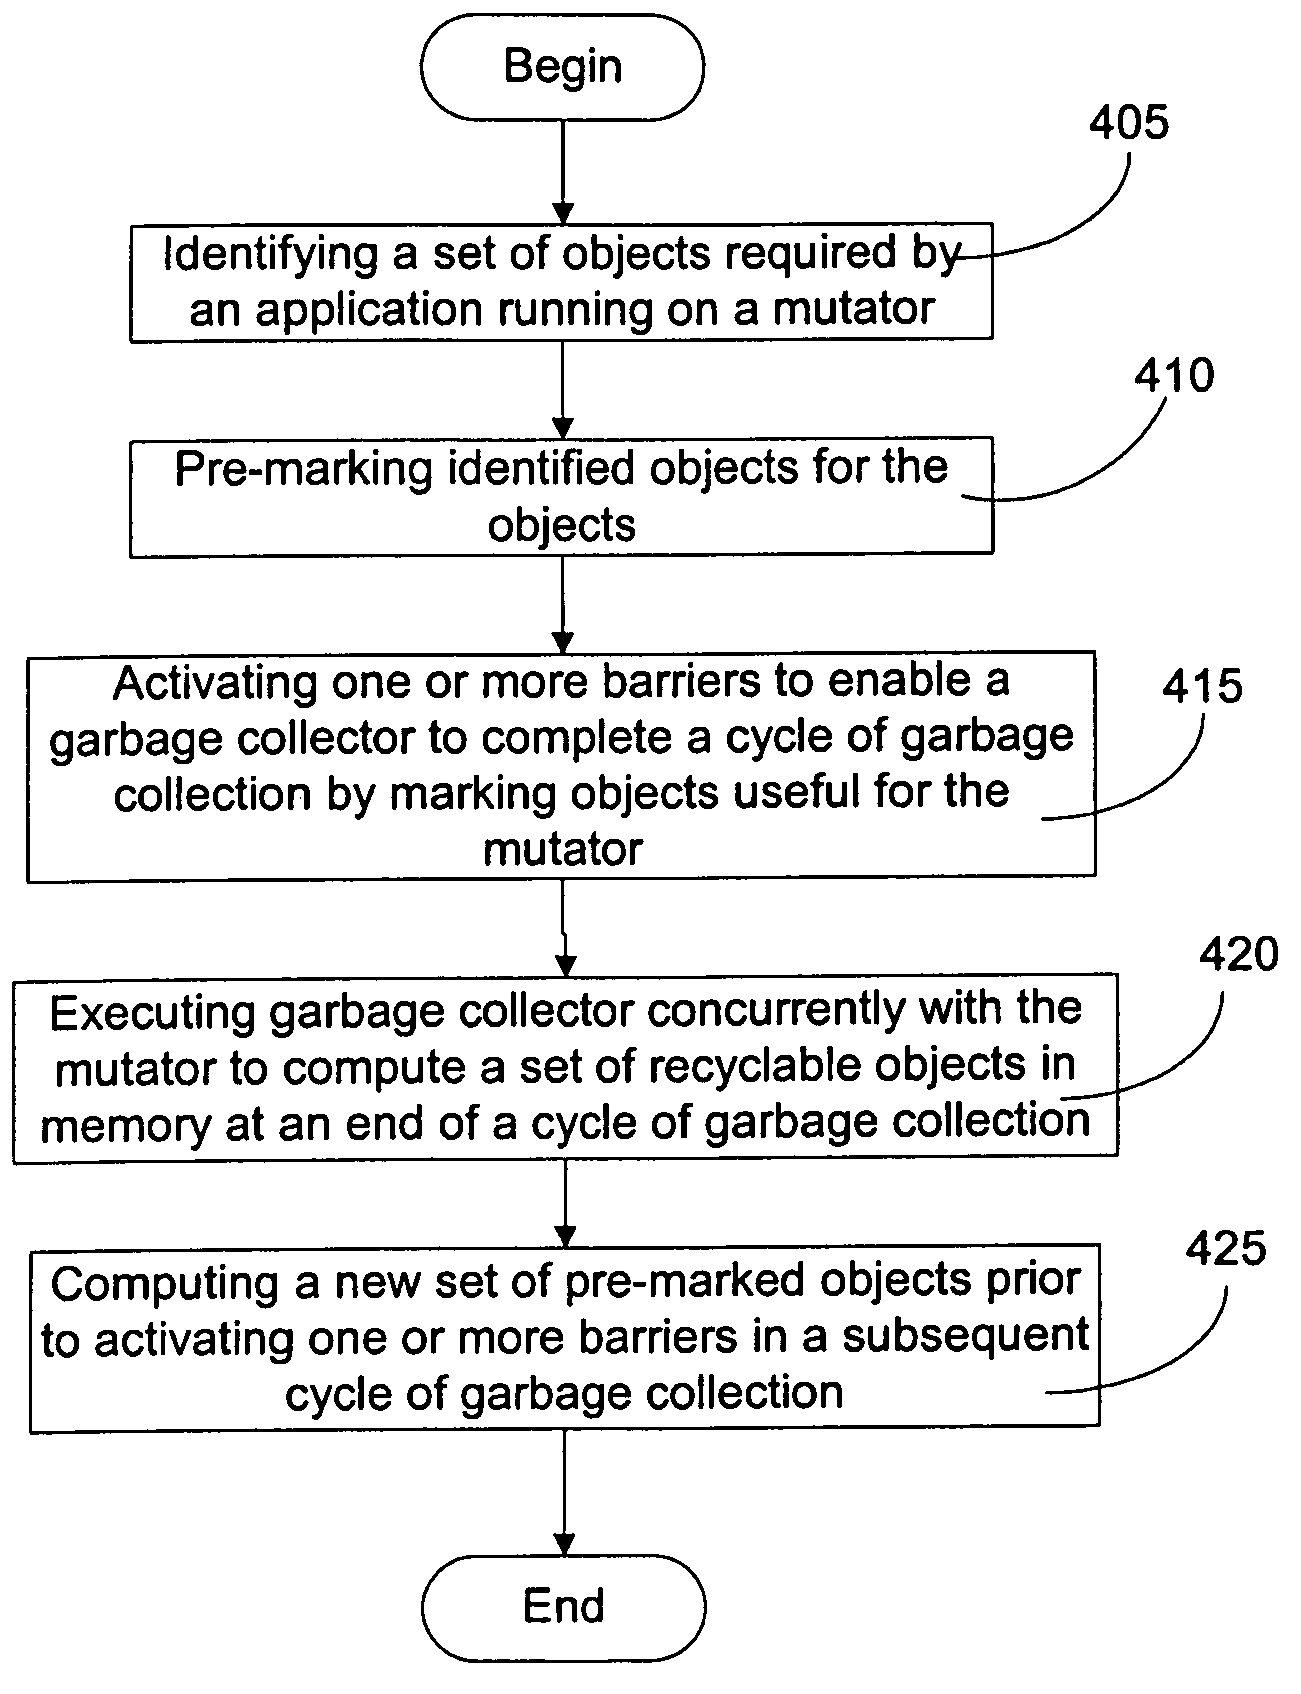 Method and system for pre-marking objects for concurrent garbage collection